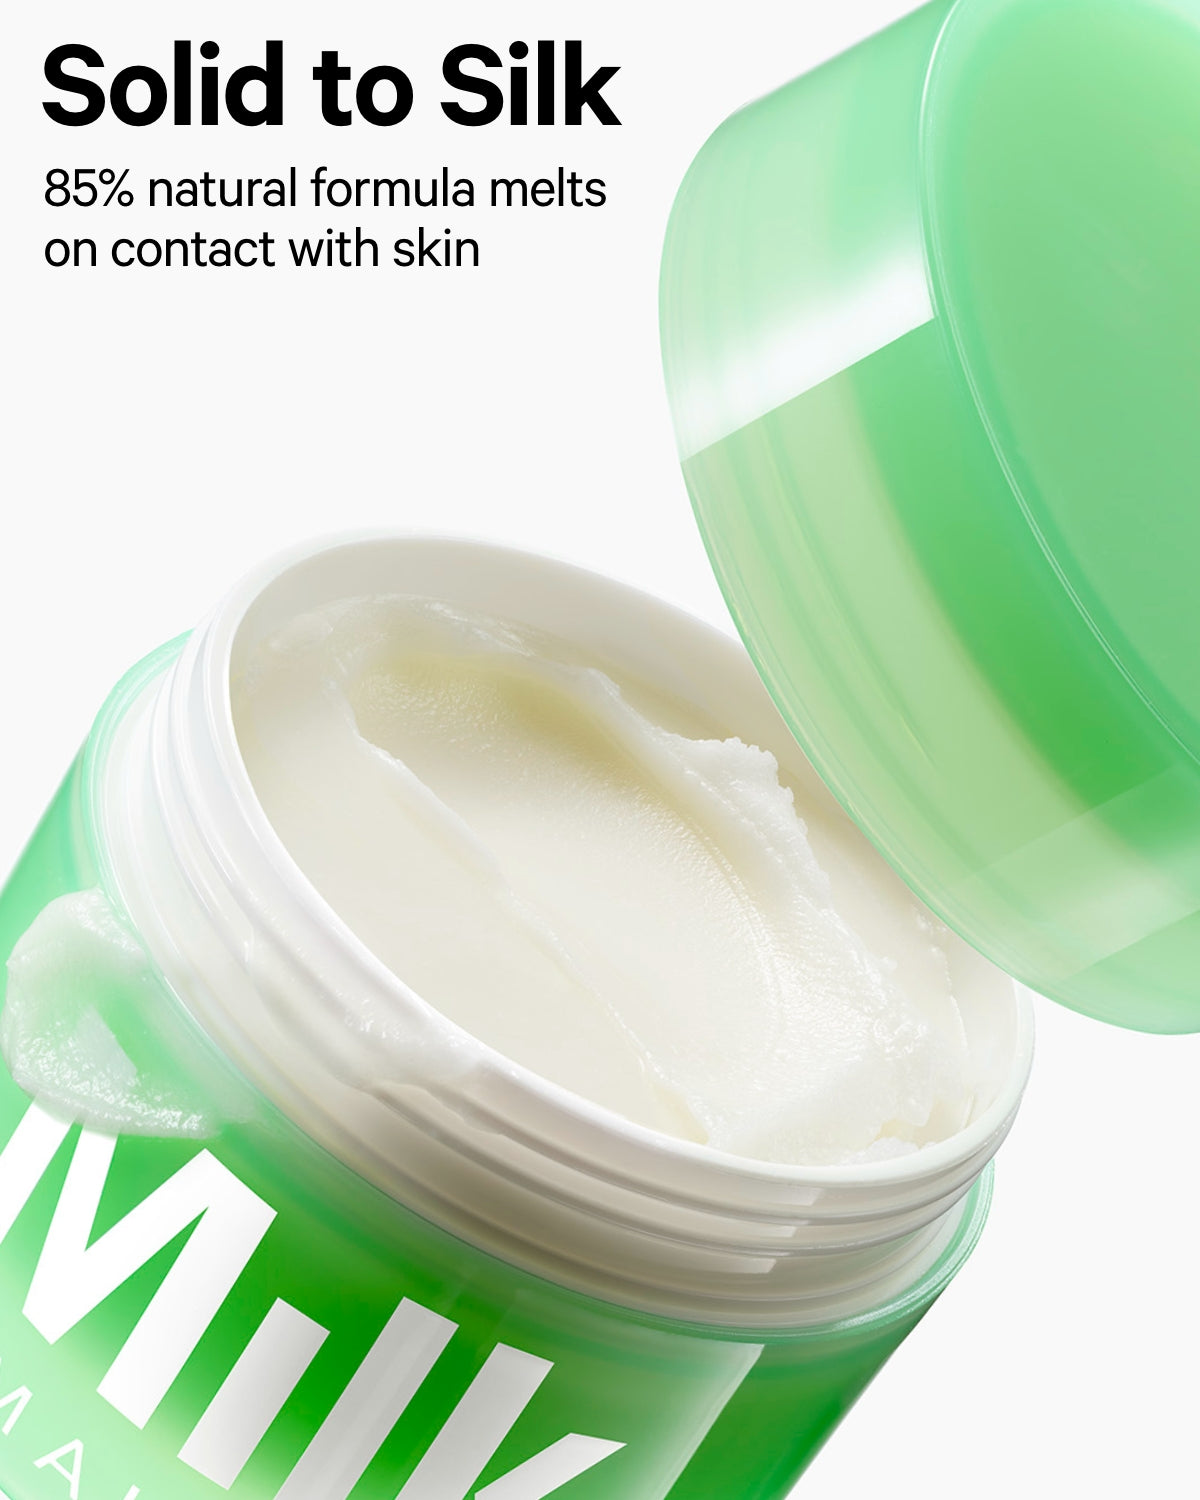 Hydro Ungrip Makeup Removing Cleansing Balm Infographic 2 | Milk Makeup